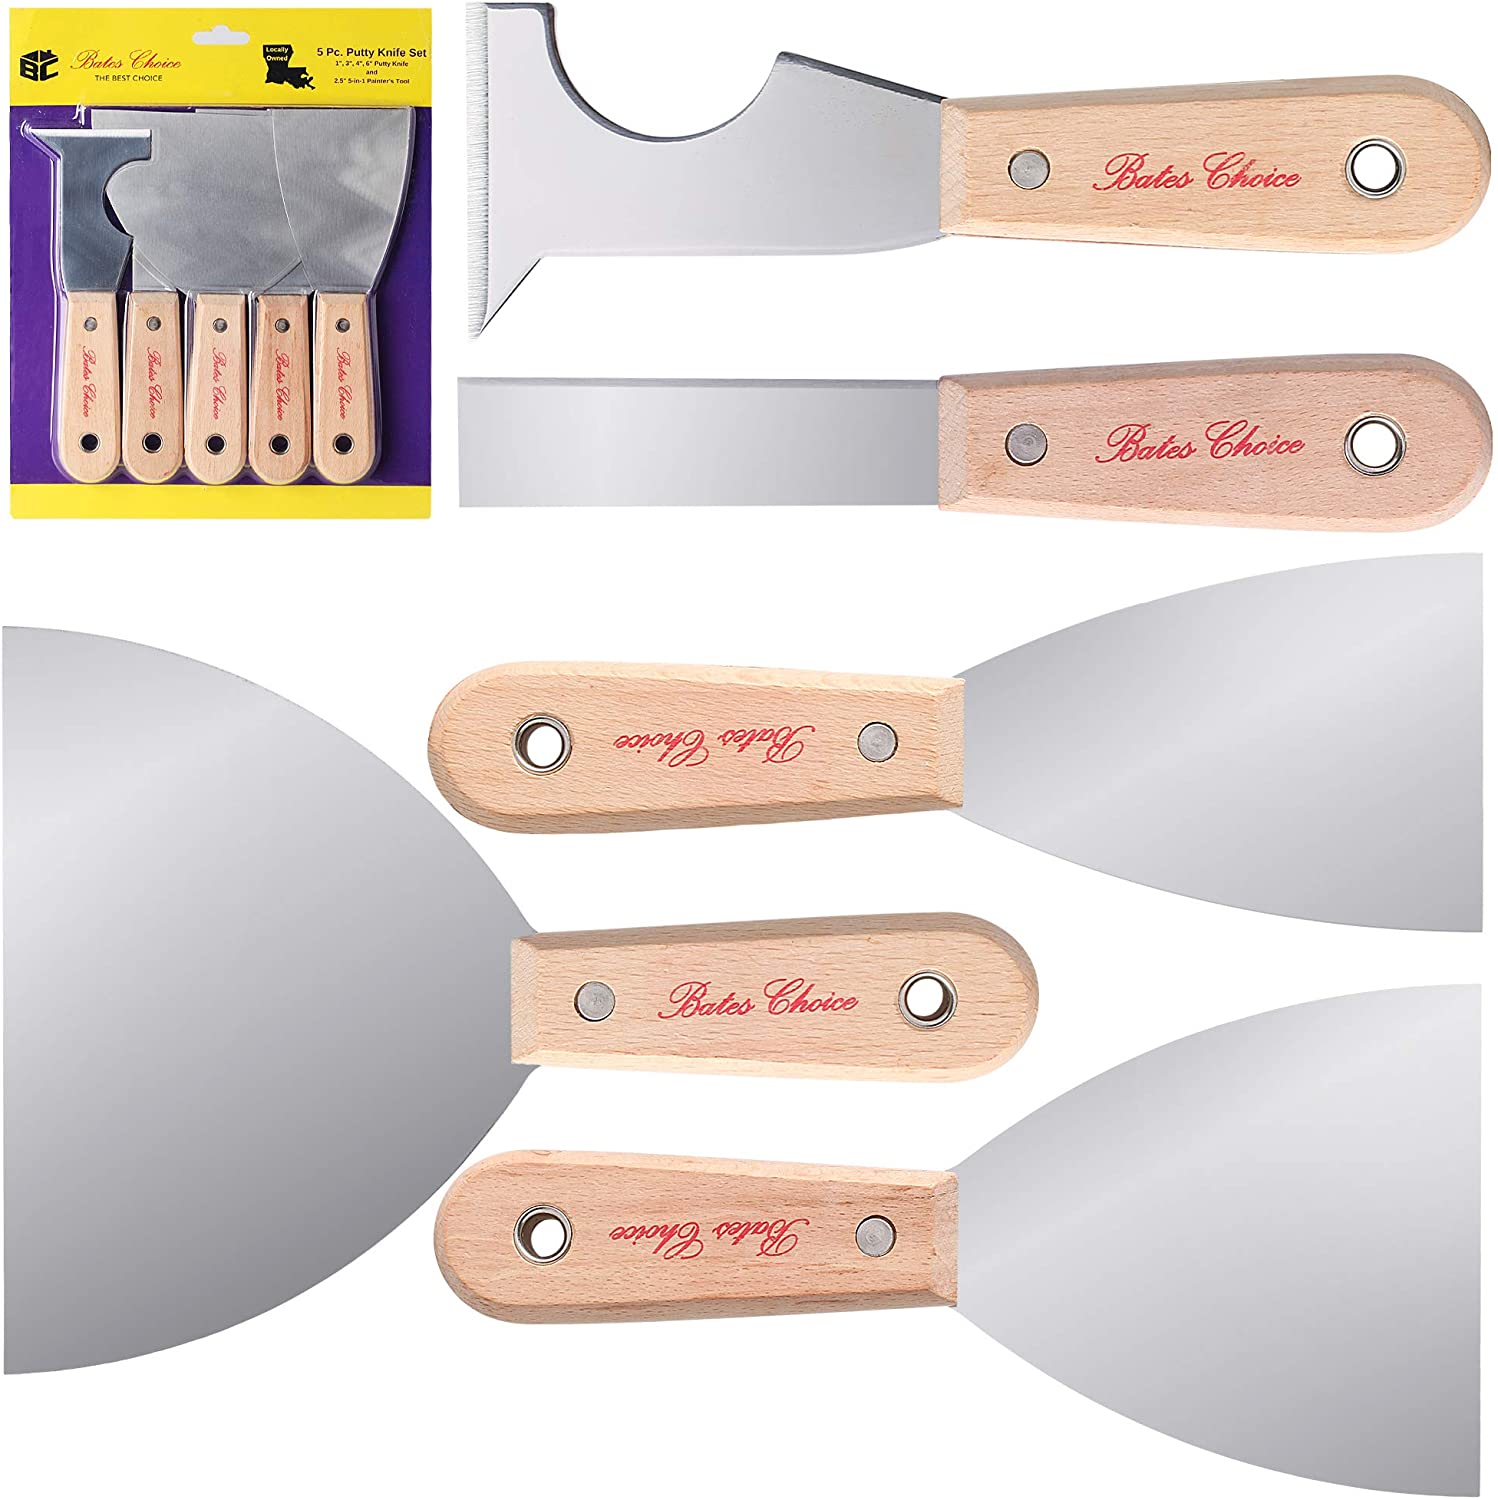 Bates- Putty Knife, Variety Size Pack, Set of 6, Plastic Scraper, Plastic  Putty Knife, Putty Knife Set, Plastic Spreader, Spackle Tool, Plastic Putty  Knife Scraper, Plastic Scraper Tool, Putty Scraper